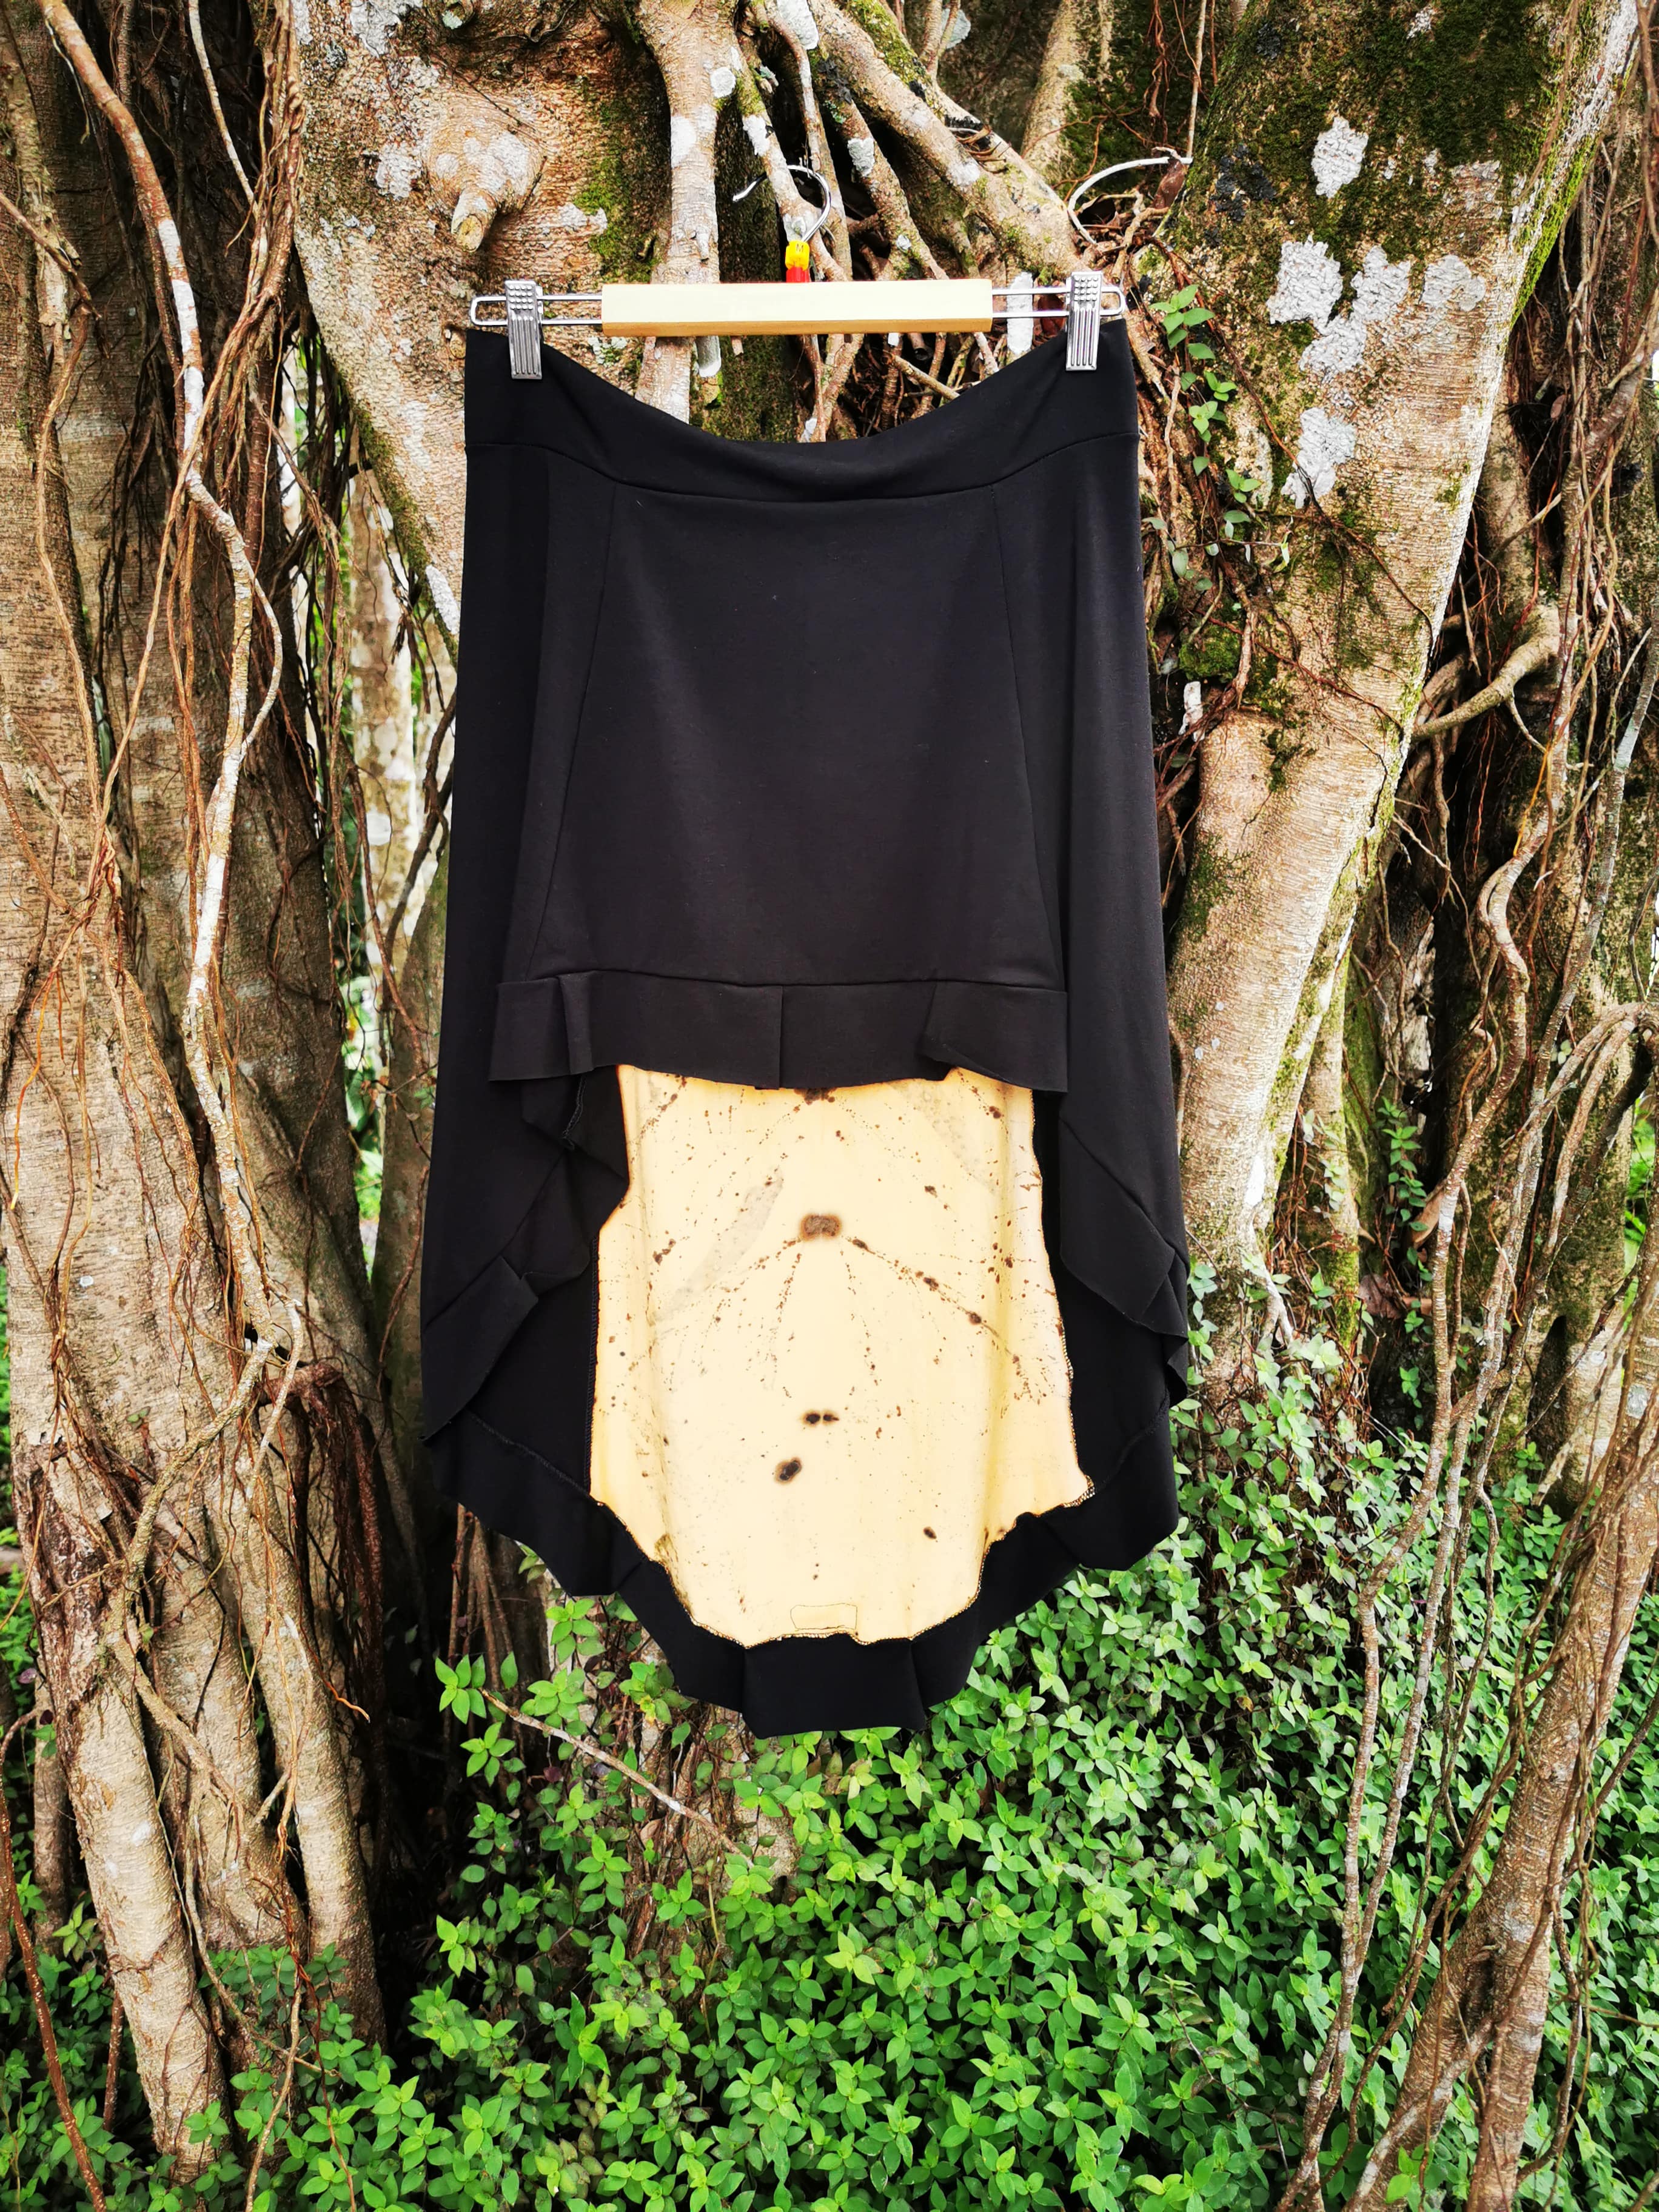 Shan-Dia Ecodye Sassy Bamboo Waterfall Style Skirt, ecofriendly, sustainable, organic manufacturing, using plants eucalyptus, acacia leaves and lilly pilly